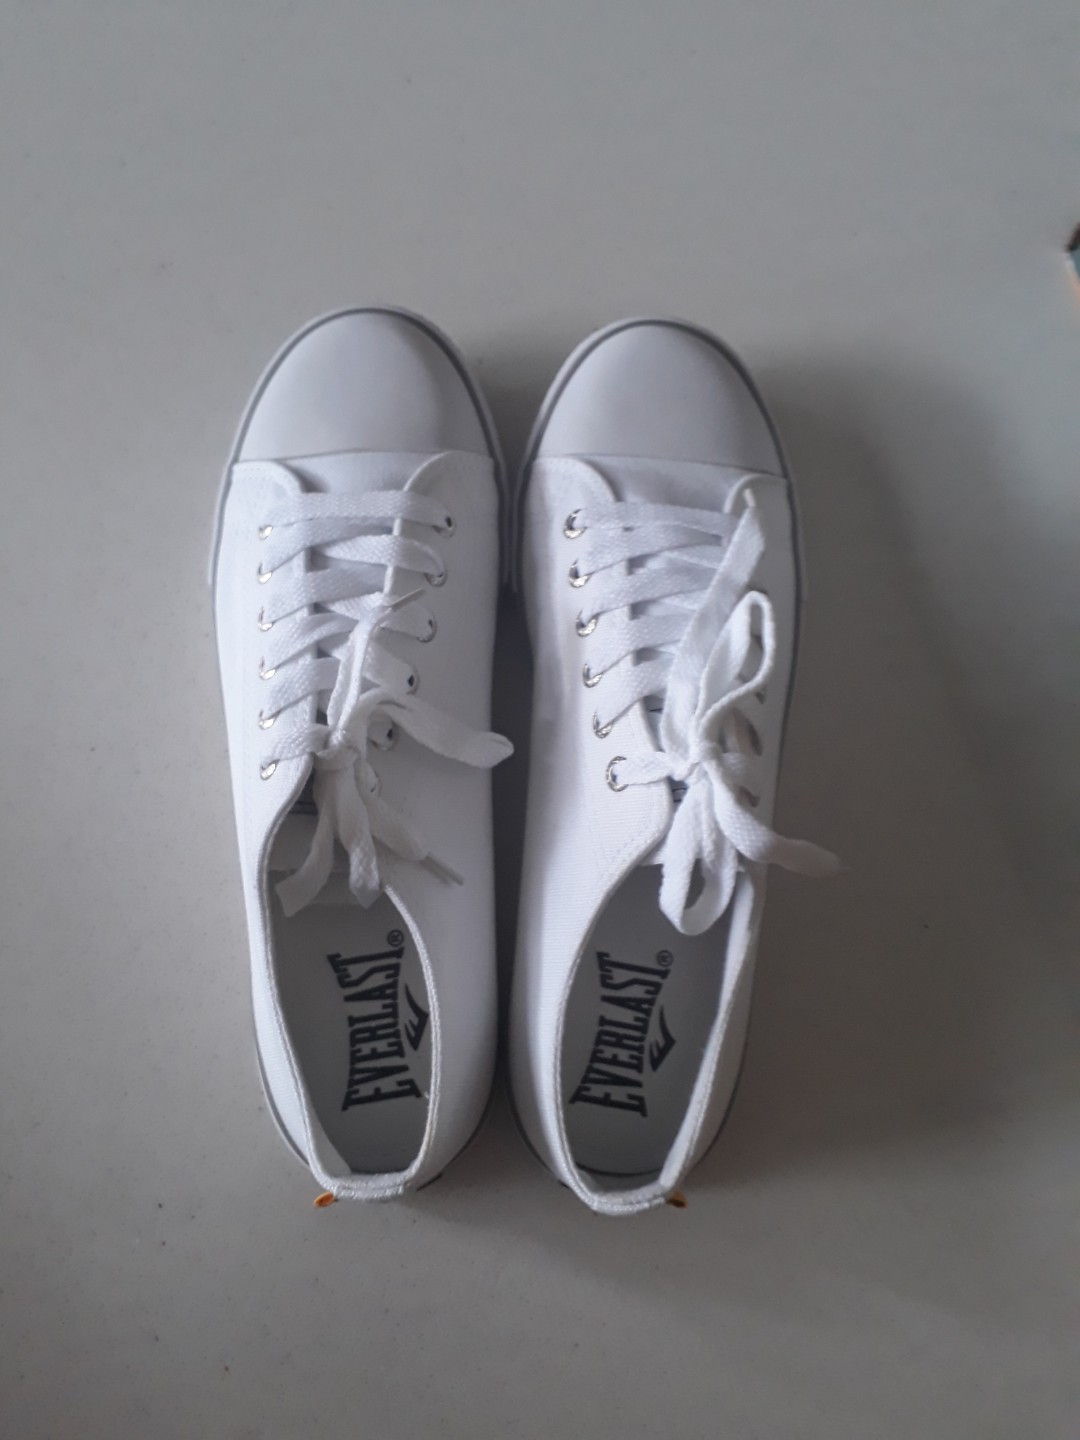 Everlast White Canvas Shoes (Grey 